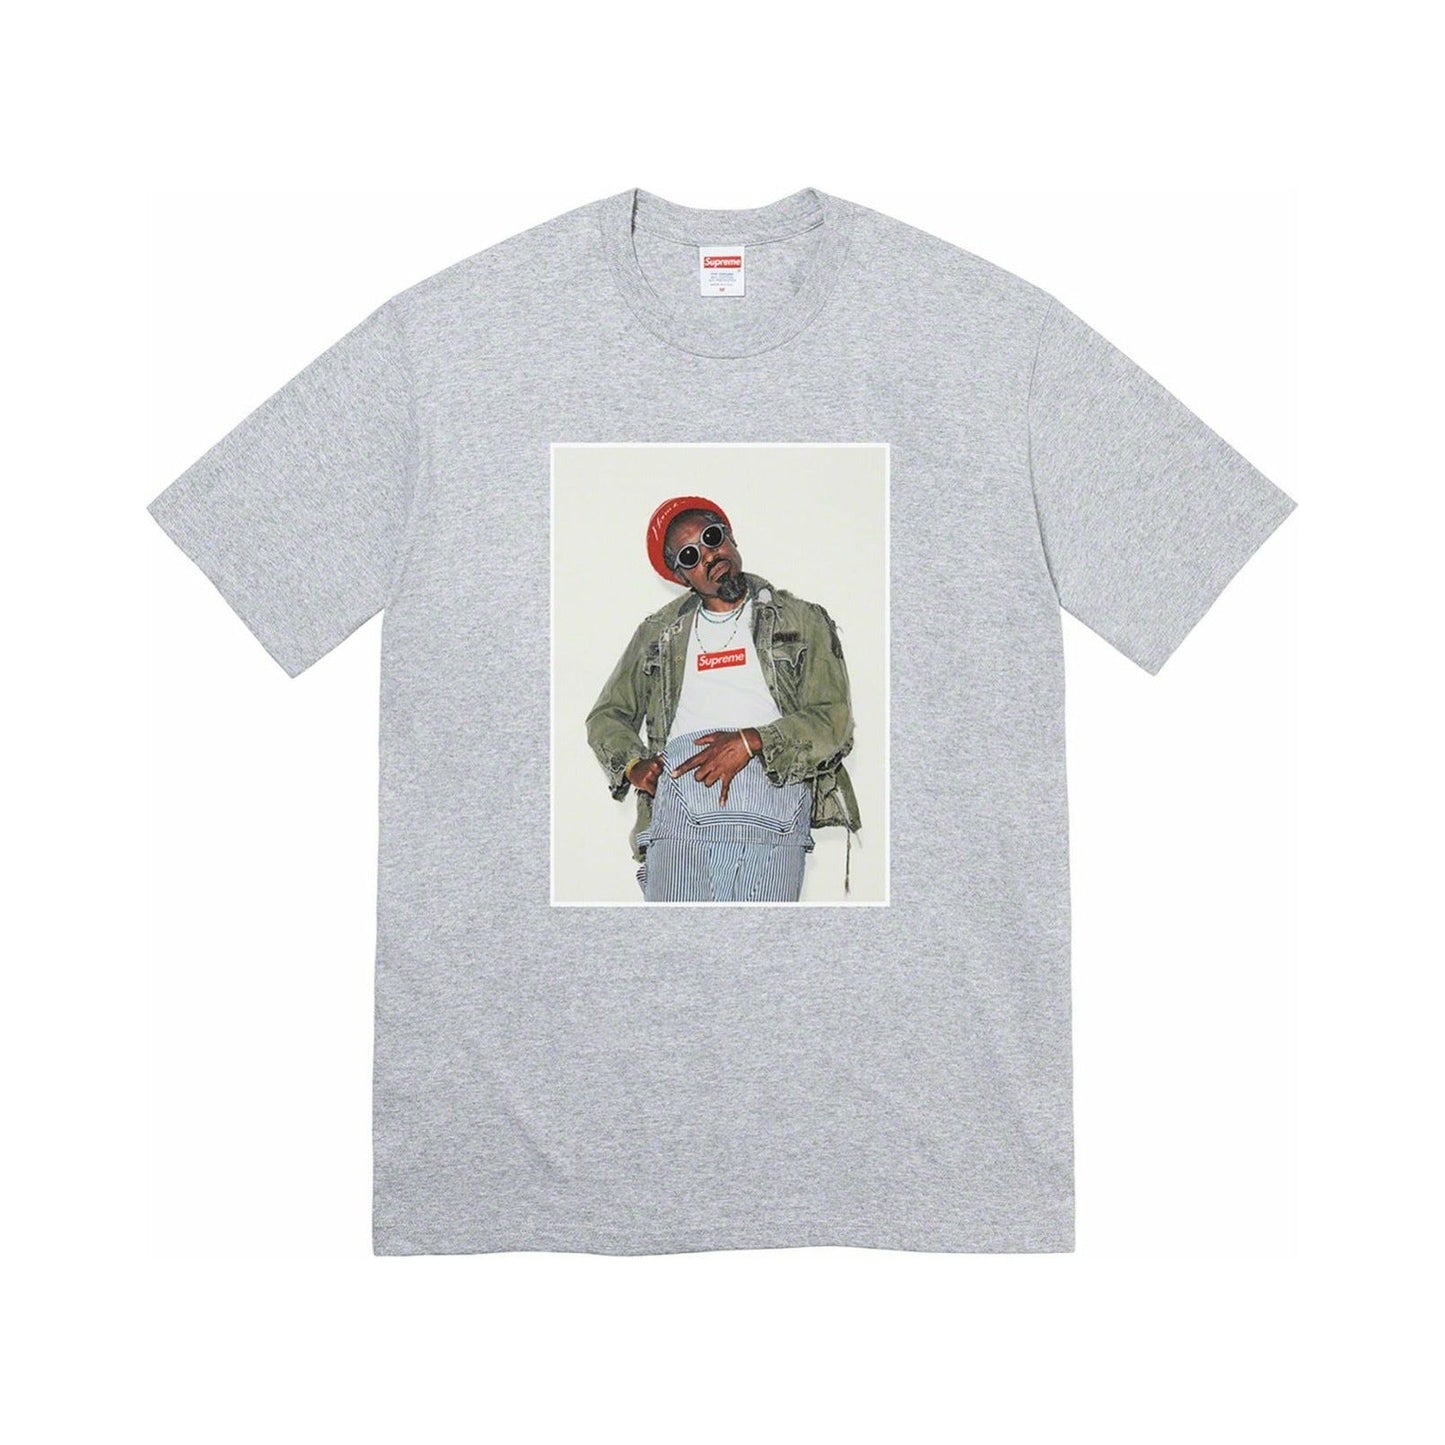 Supreme Andre 3000 Tee Grey from Supreme